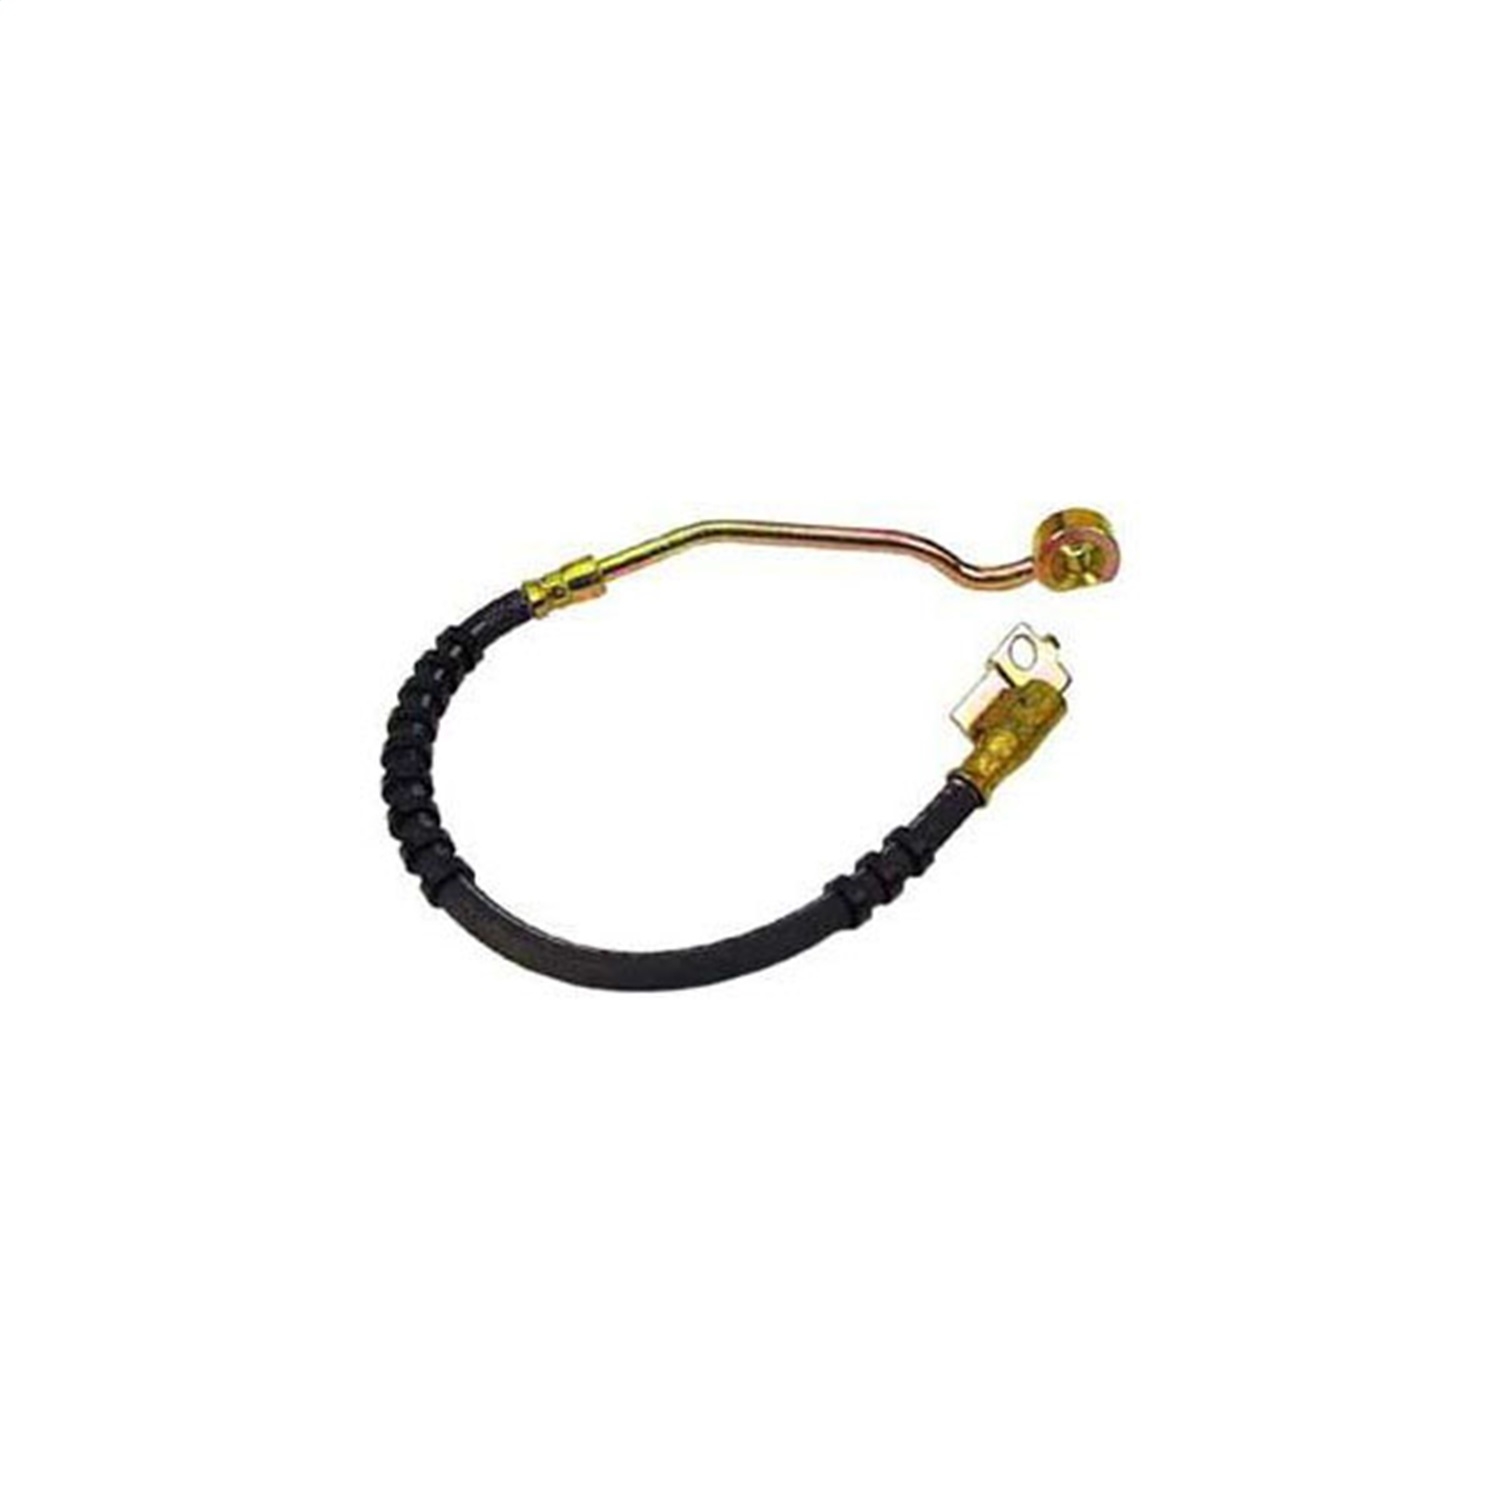 Omix Brake Hose (Front), Without Abs, Right, 90-95 Jeep Wrangler Yj, BKGF-16732.14